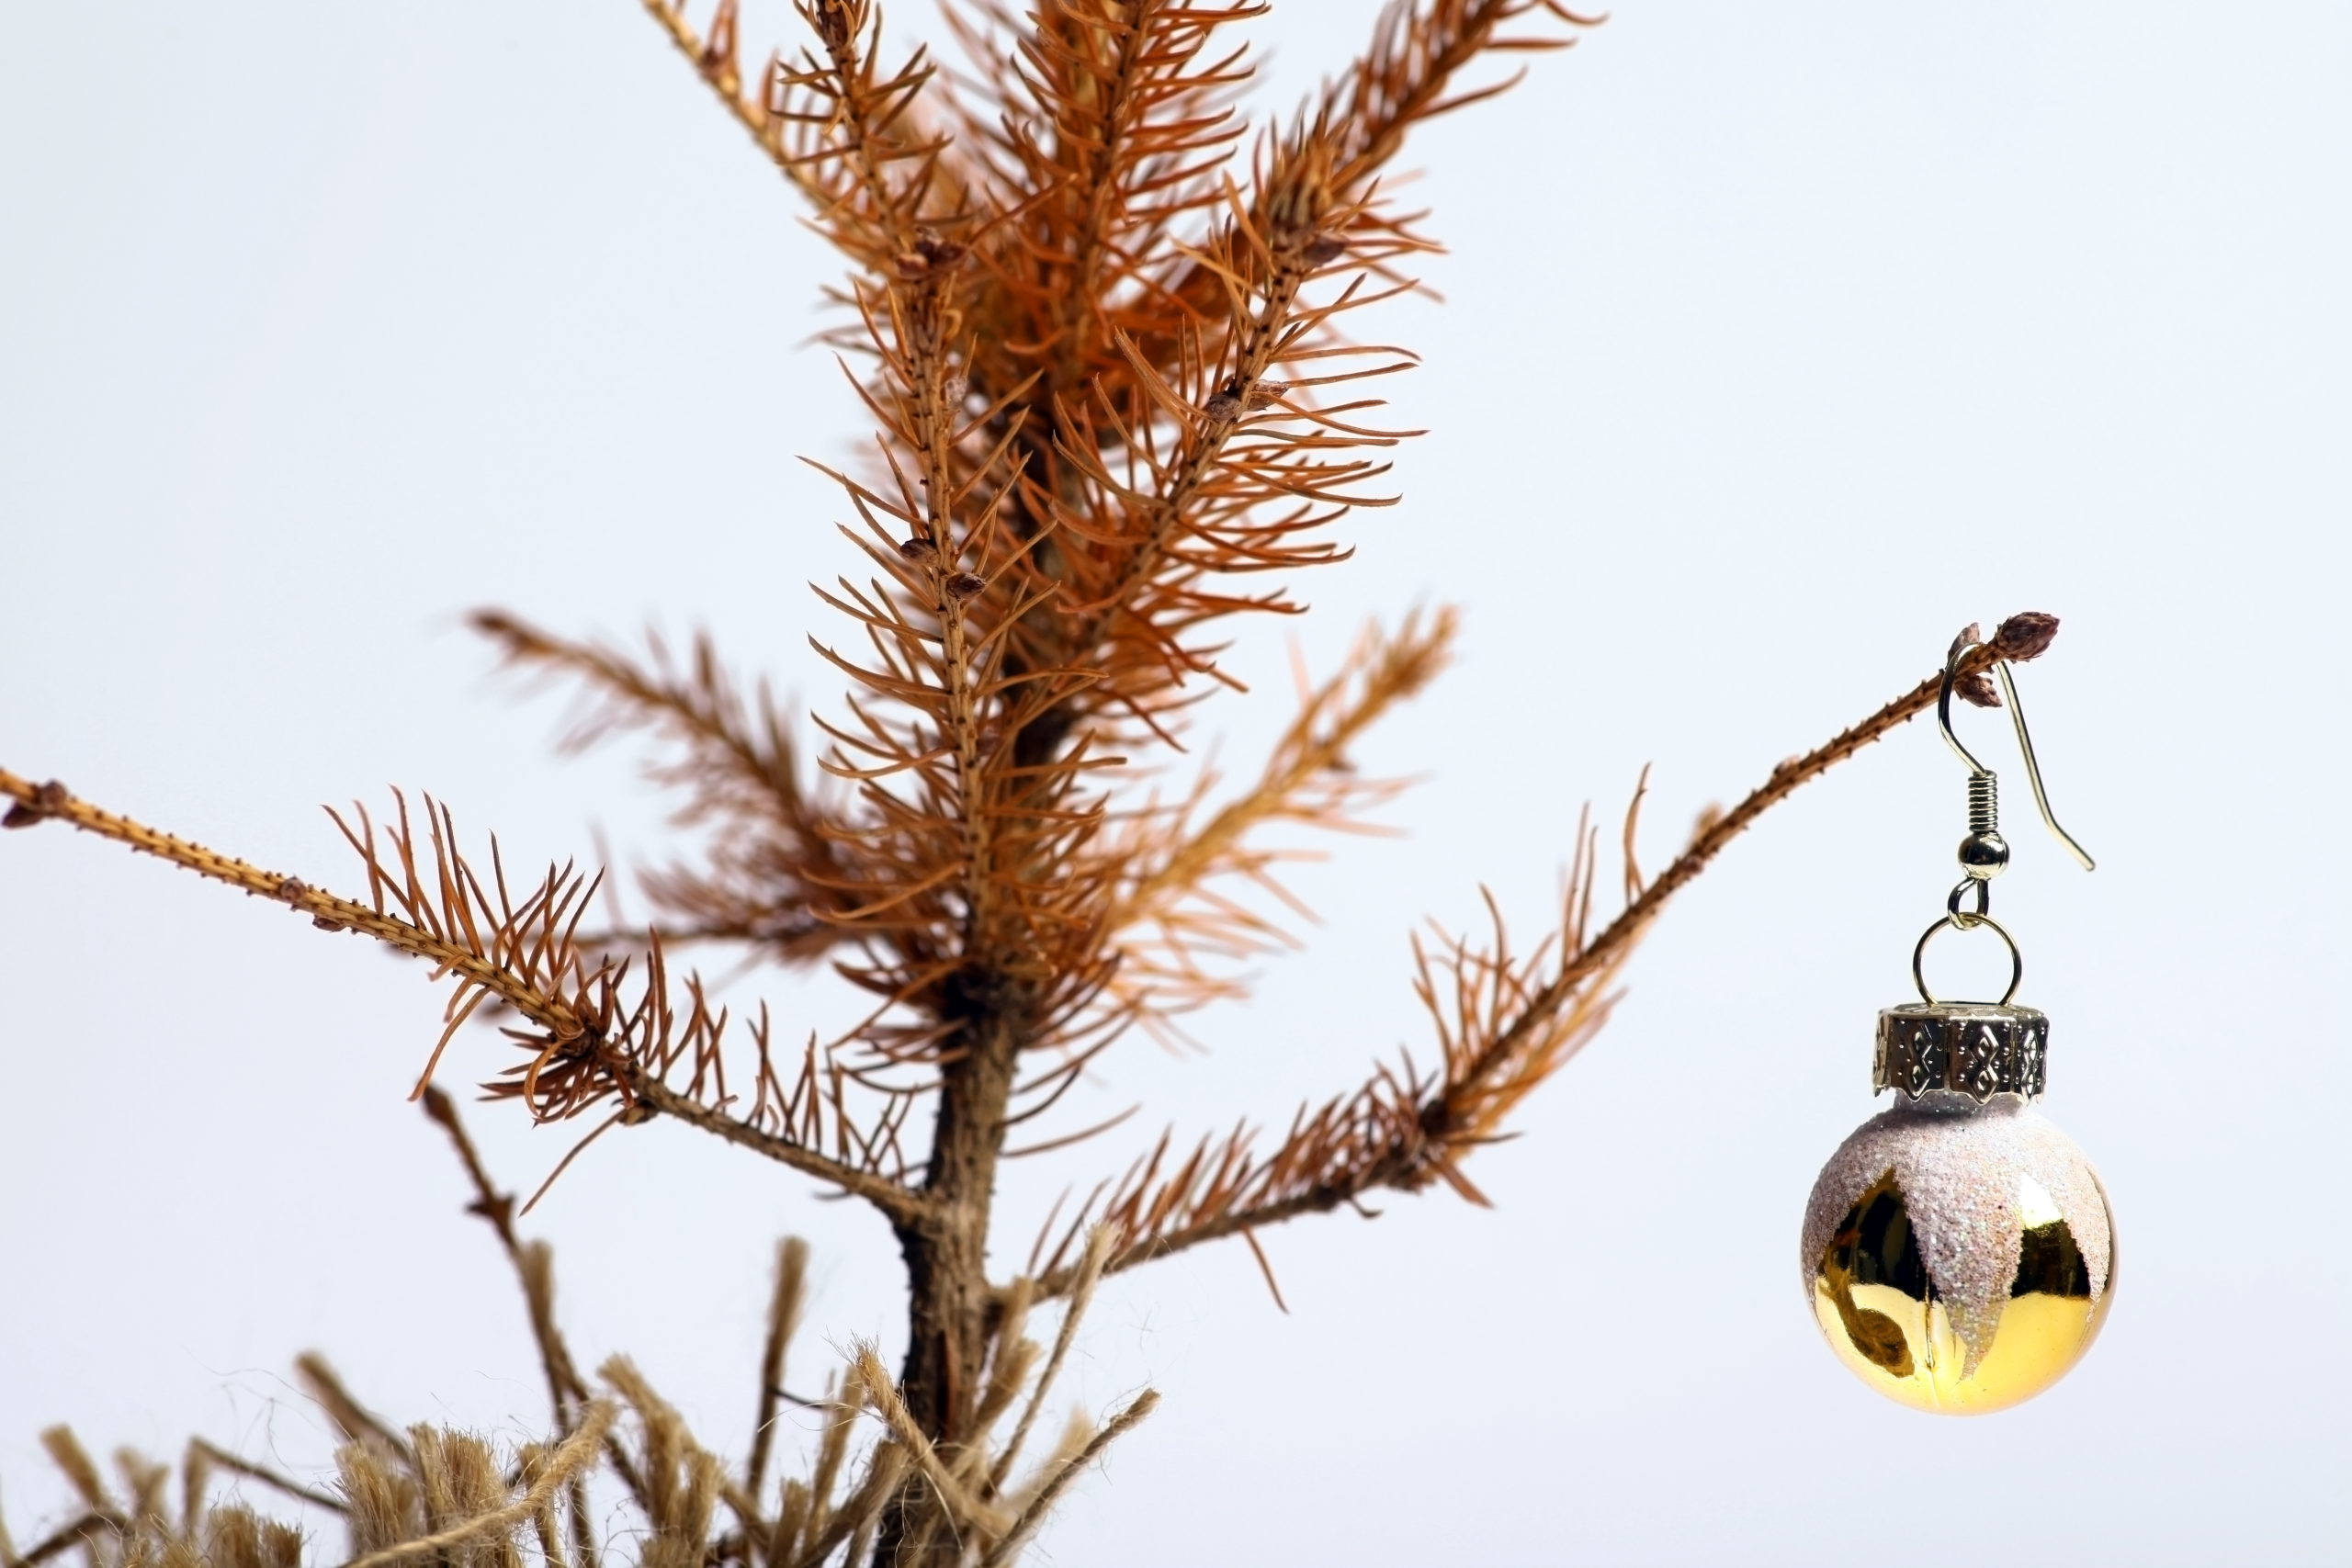 20 Tips for Christmas Tree Fire Safety